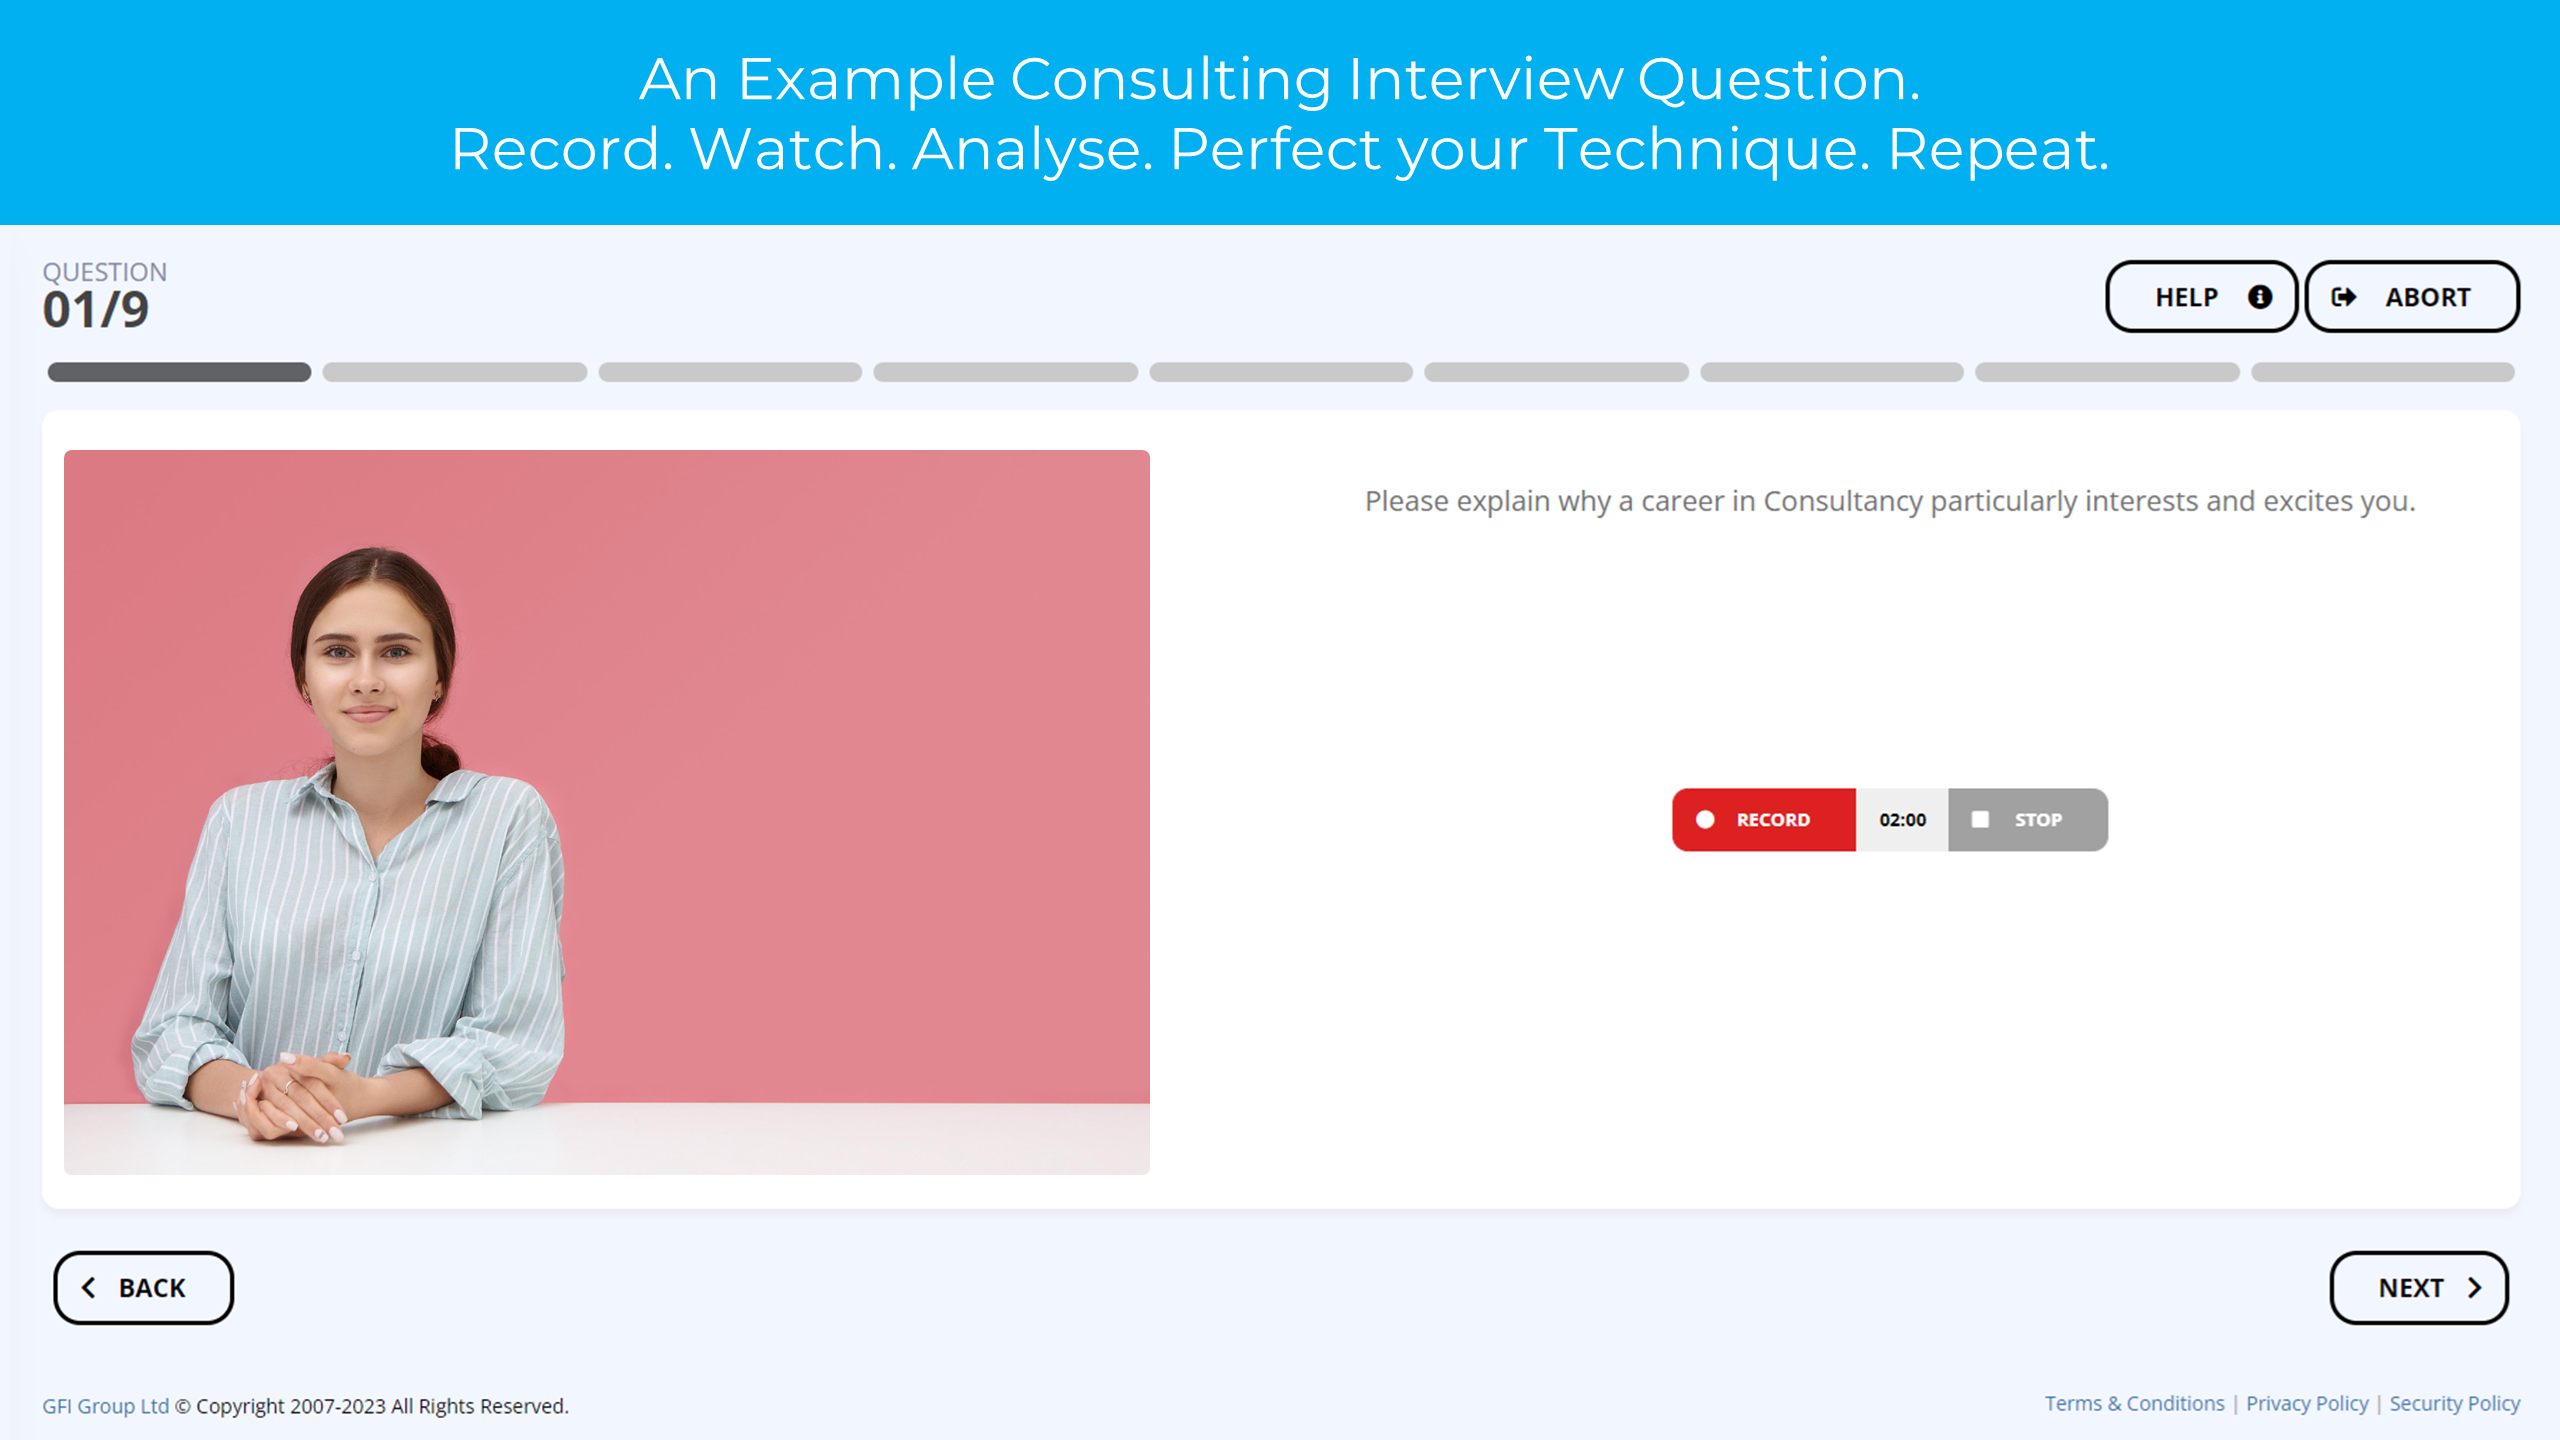 Practice Consulting Video Interview Questions